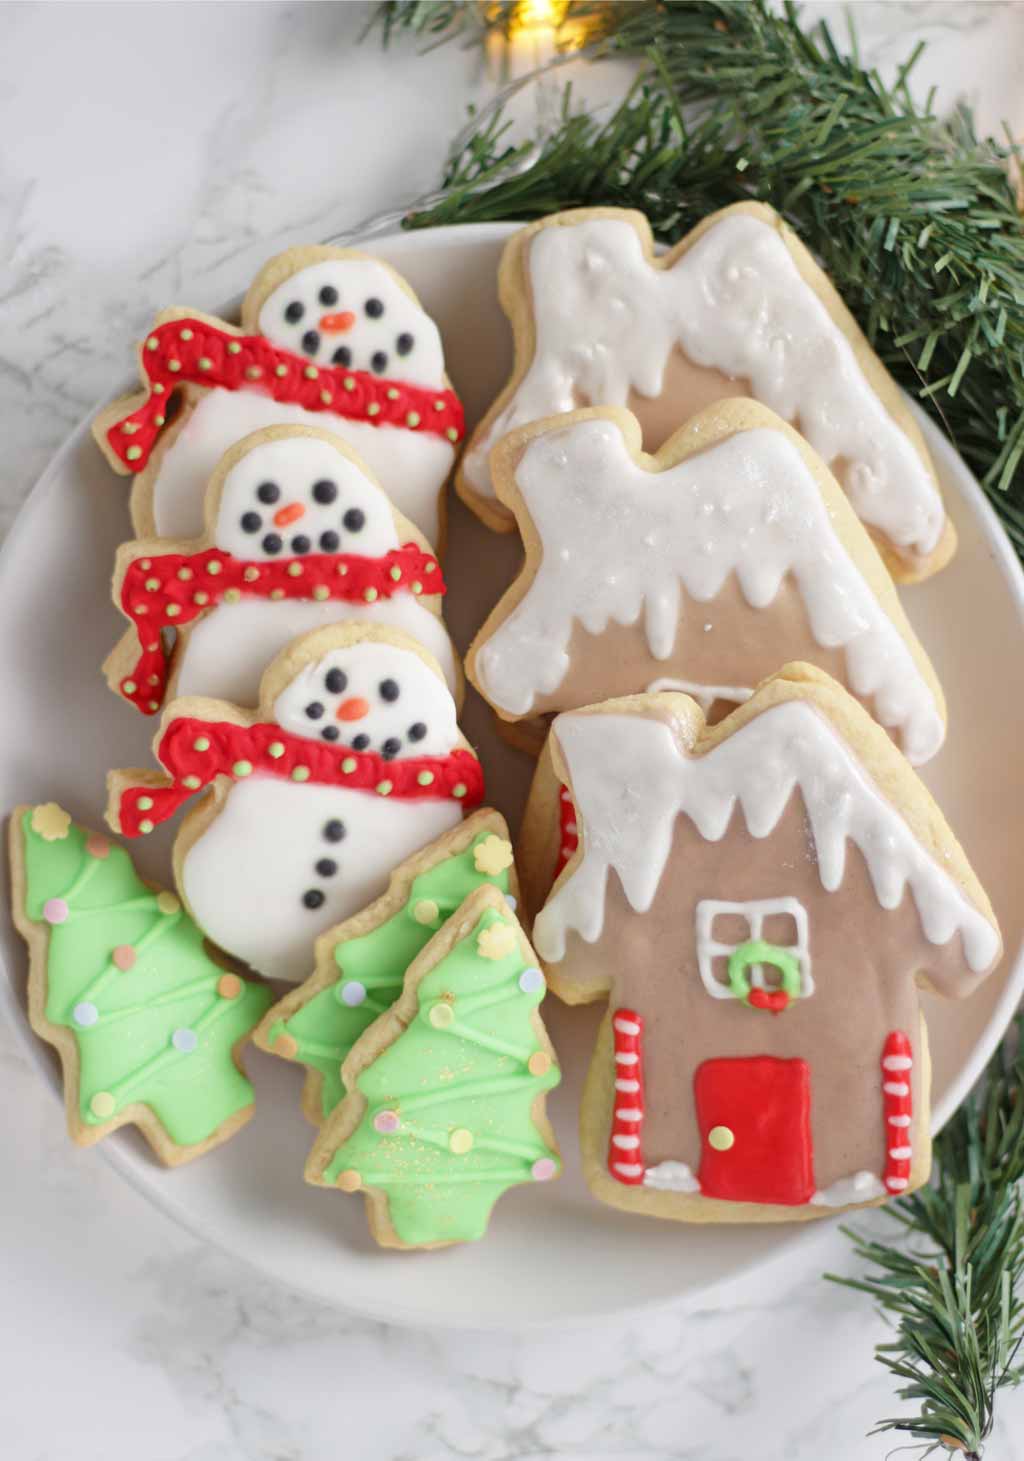 cookies decorated with royal icing on a plate. Christmas tree cookies, gingerbread house cookies and snowmen cookies.